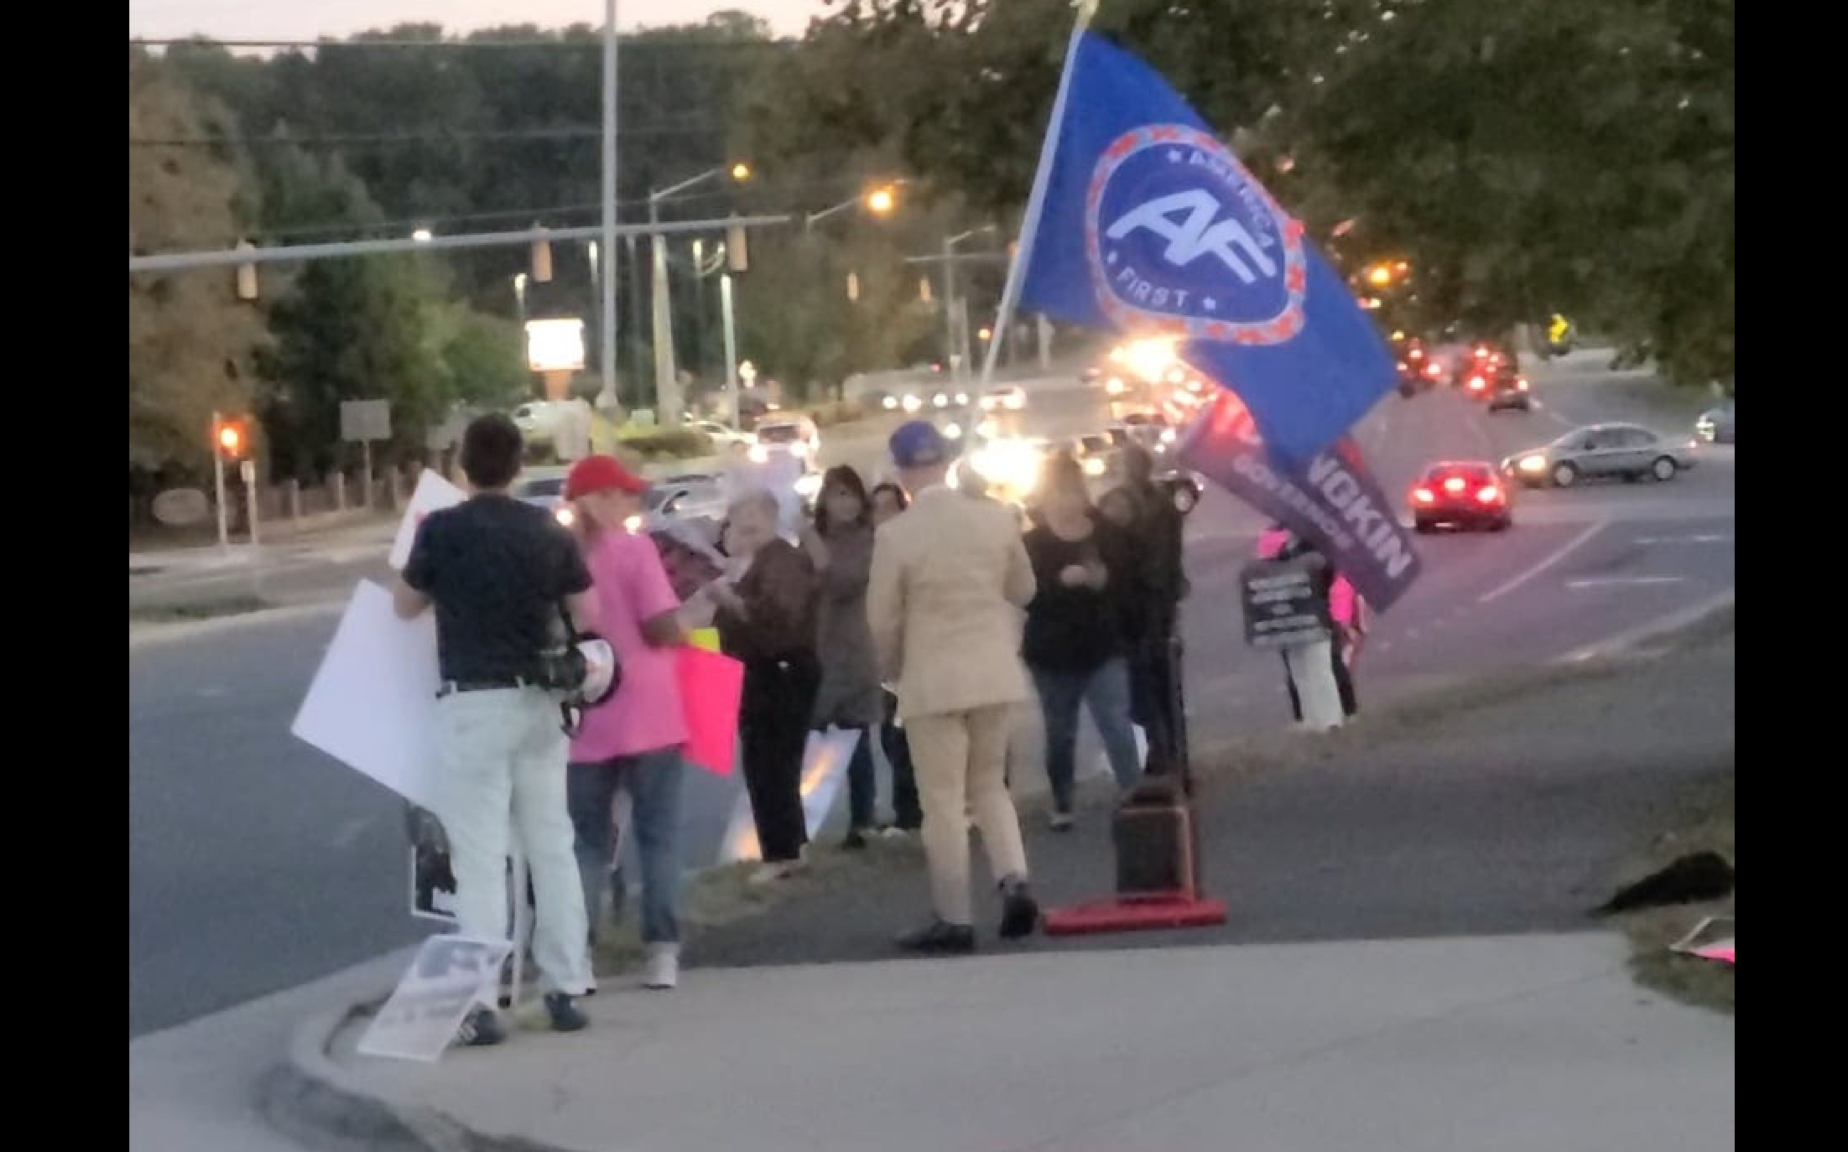 White nationalists carrying an "America First" and "Youngkin for Governor" flags outside a school board meeting on October 21, 2021 in Fairfax, VA